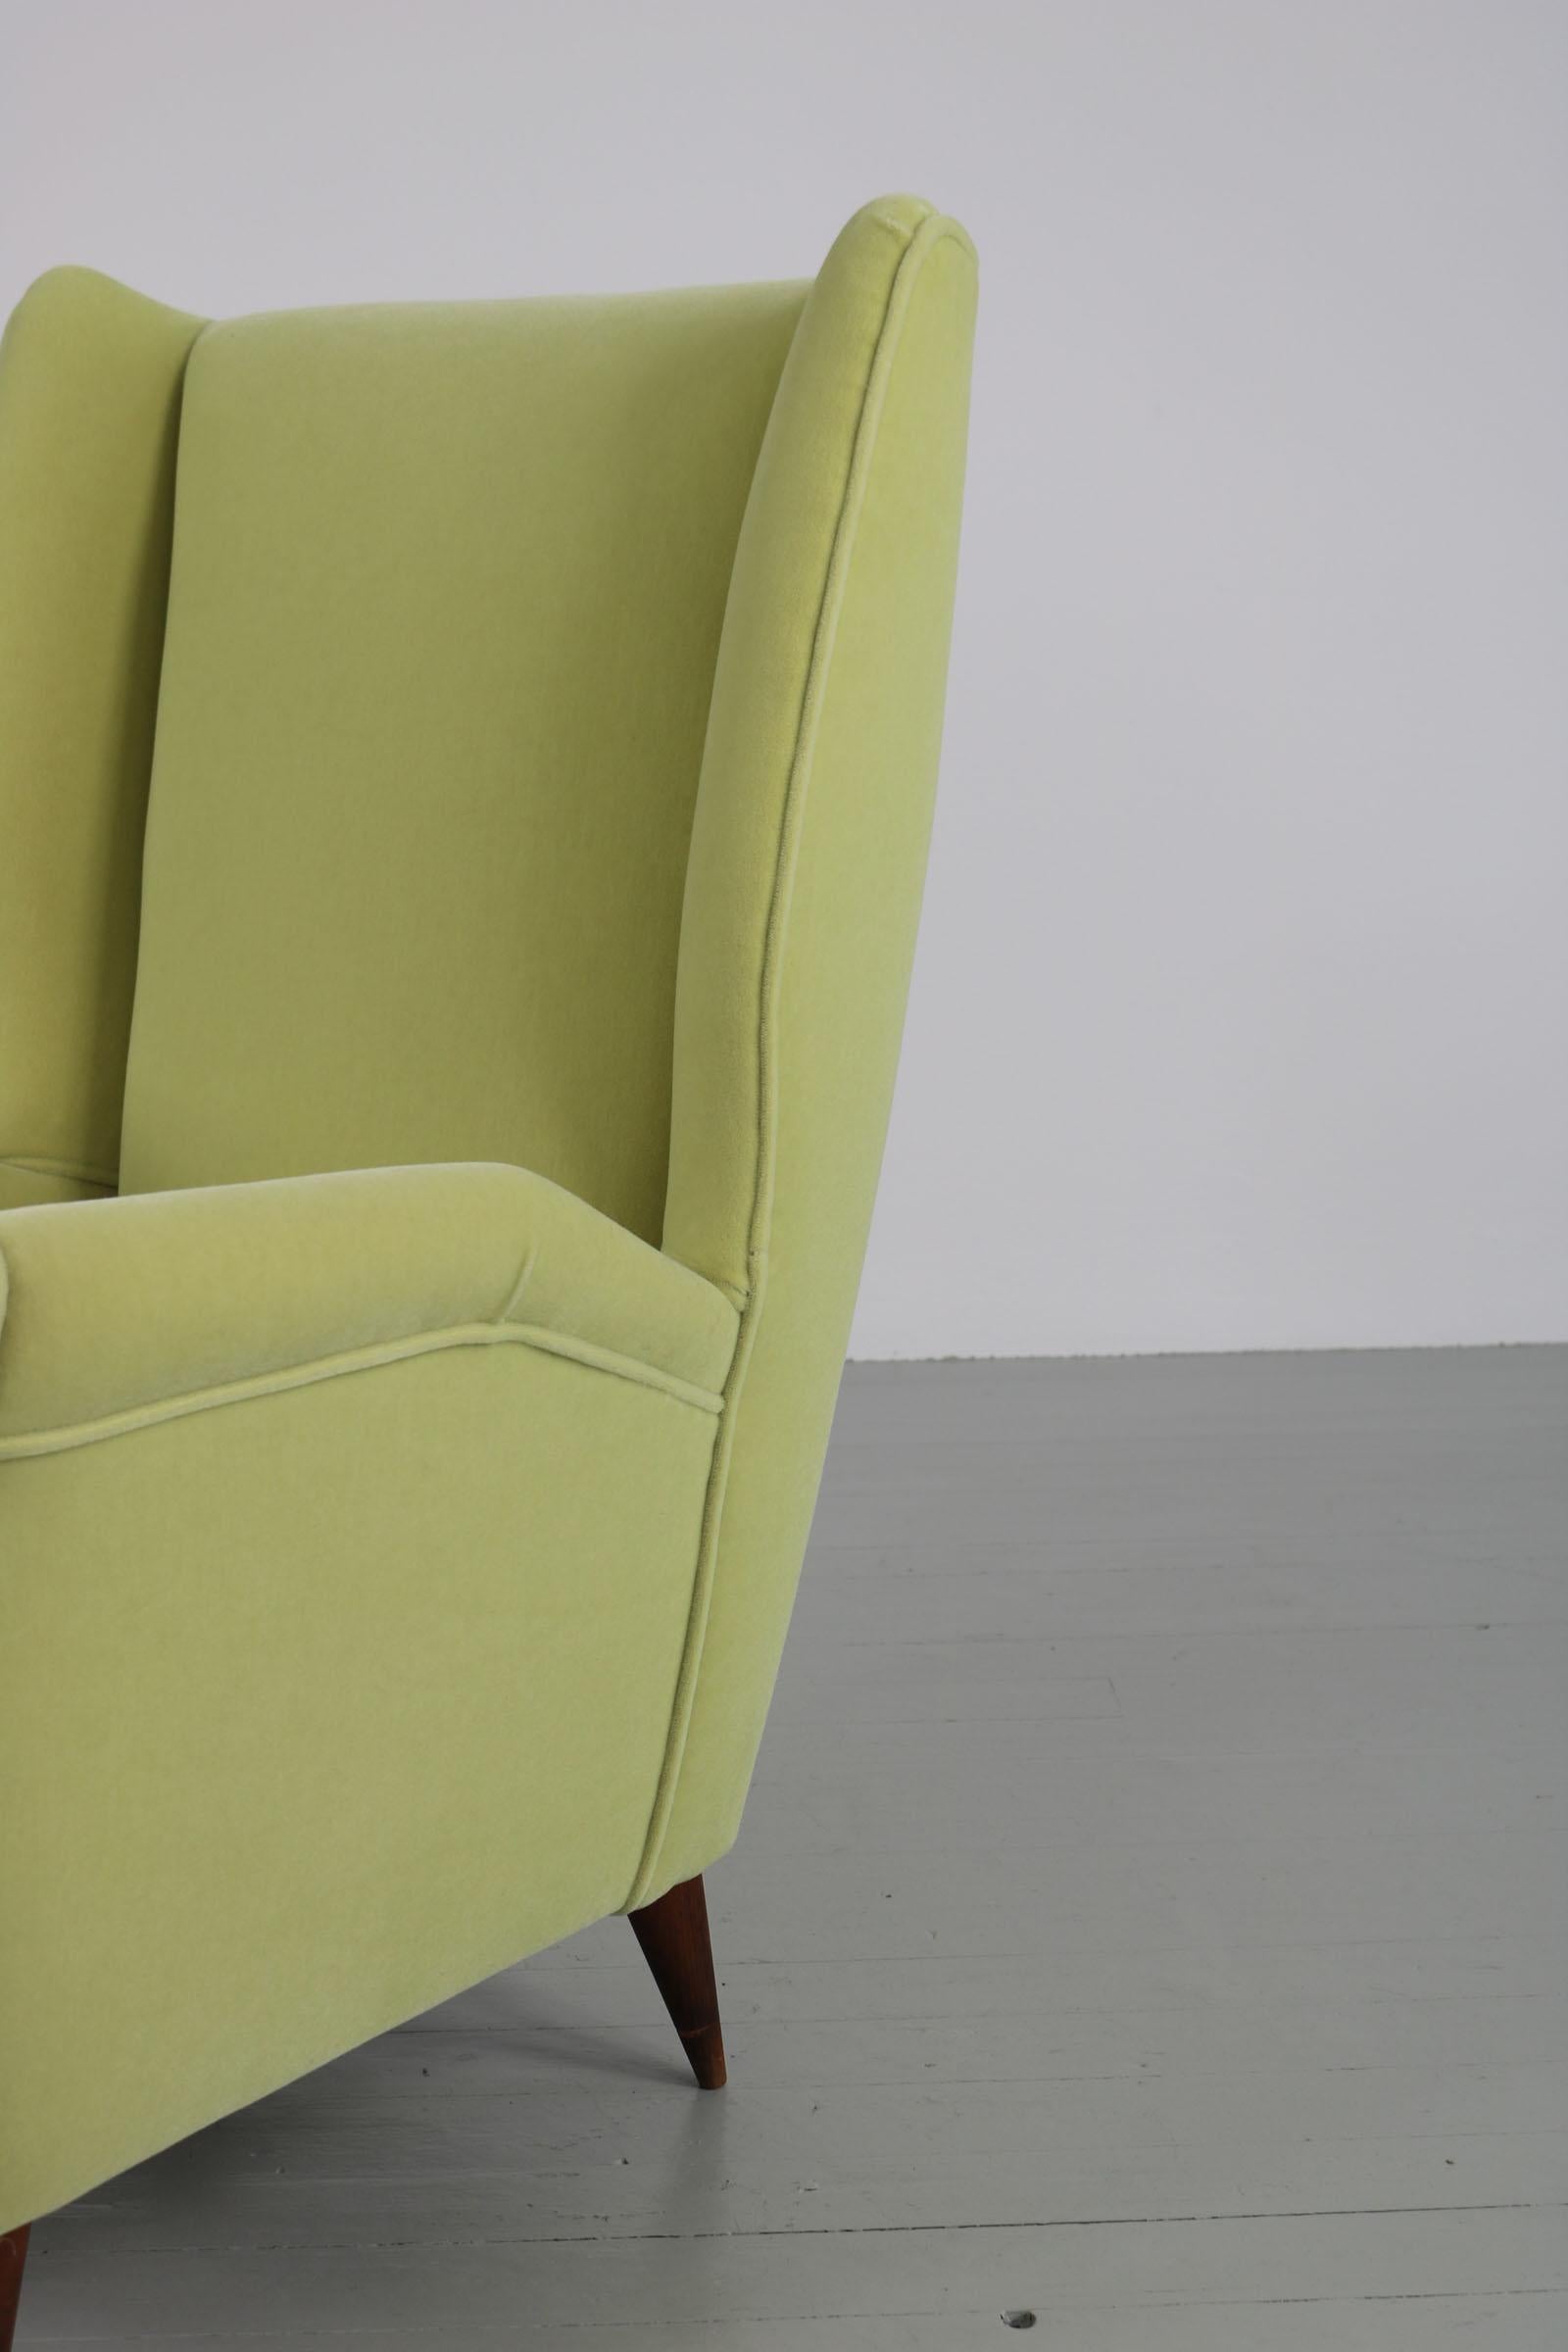 Italian Yellow Wingback Chair, Produced by I.S.A. Bergamo, 1950s For Sale 6